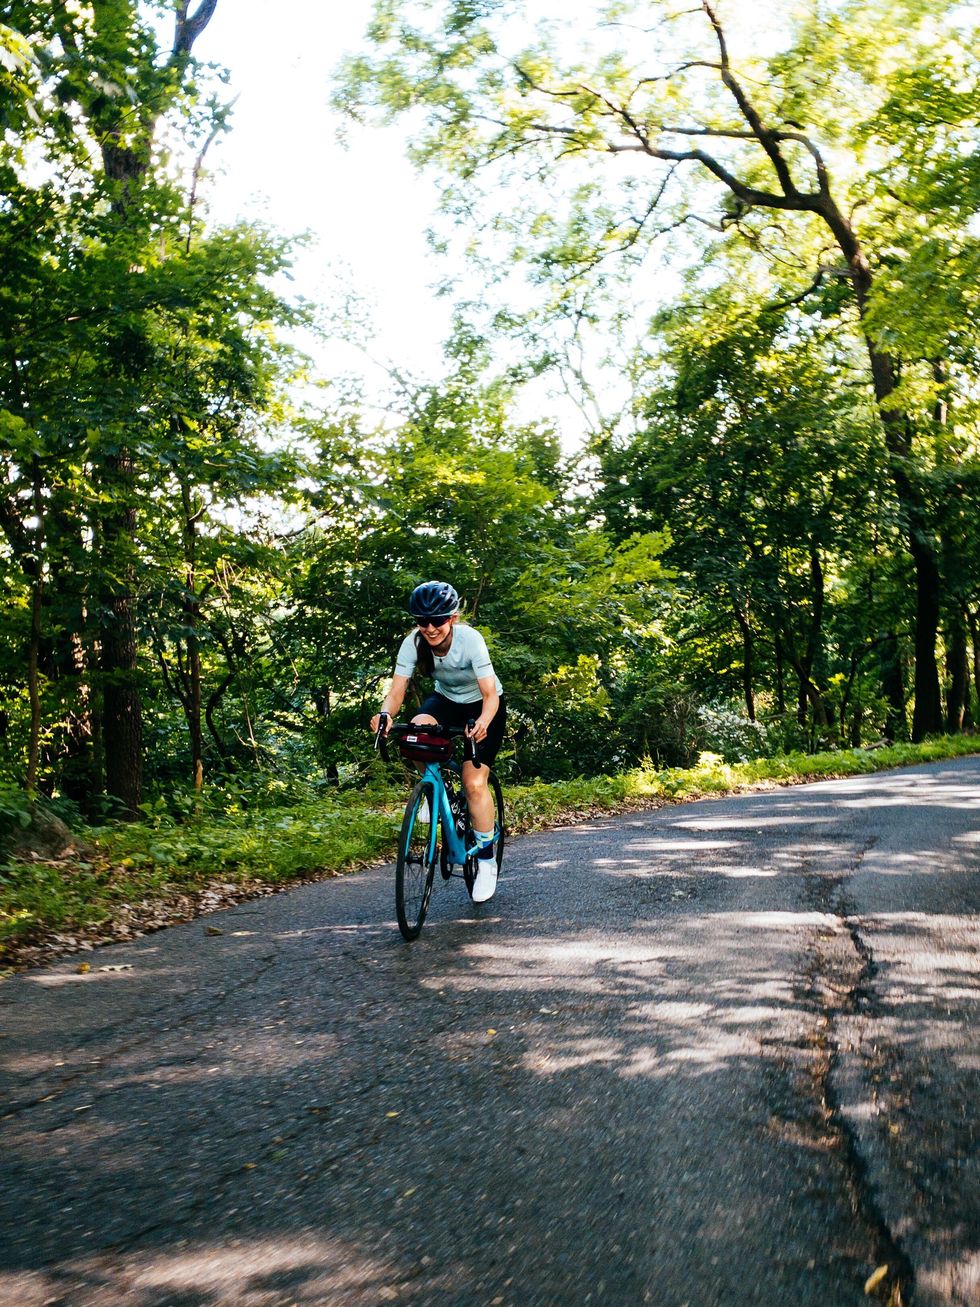 amy wolff riding the canyon endurace on a hill in easton, pa in june 2020